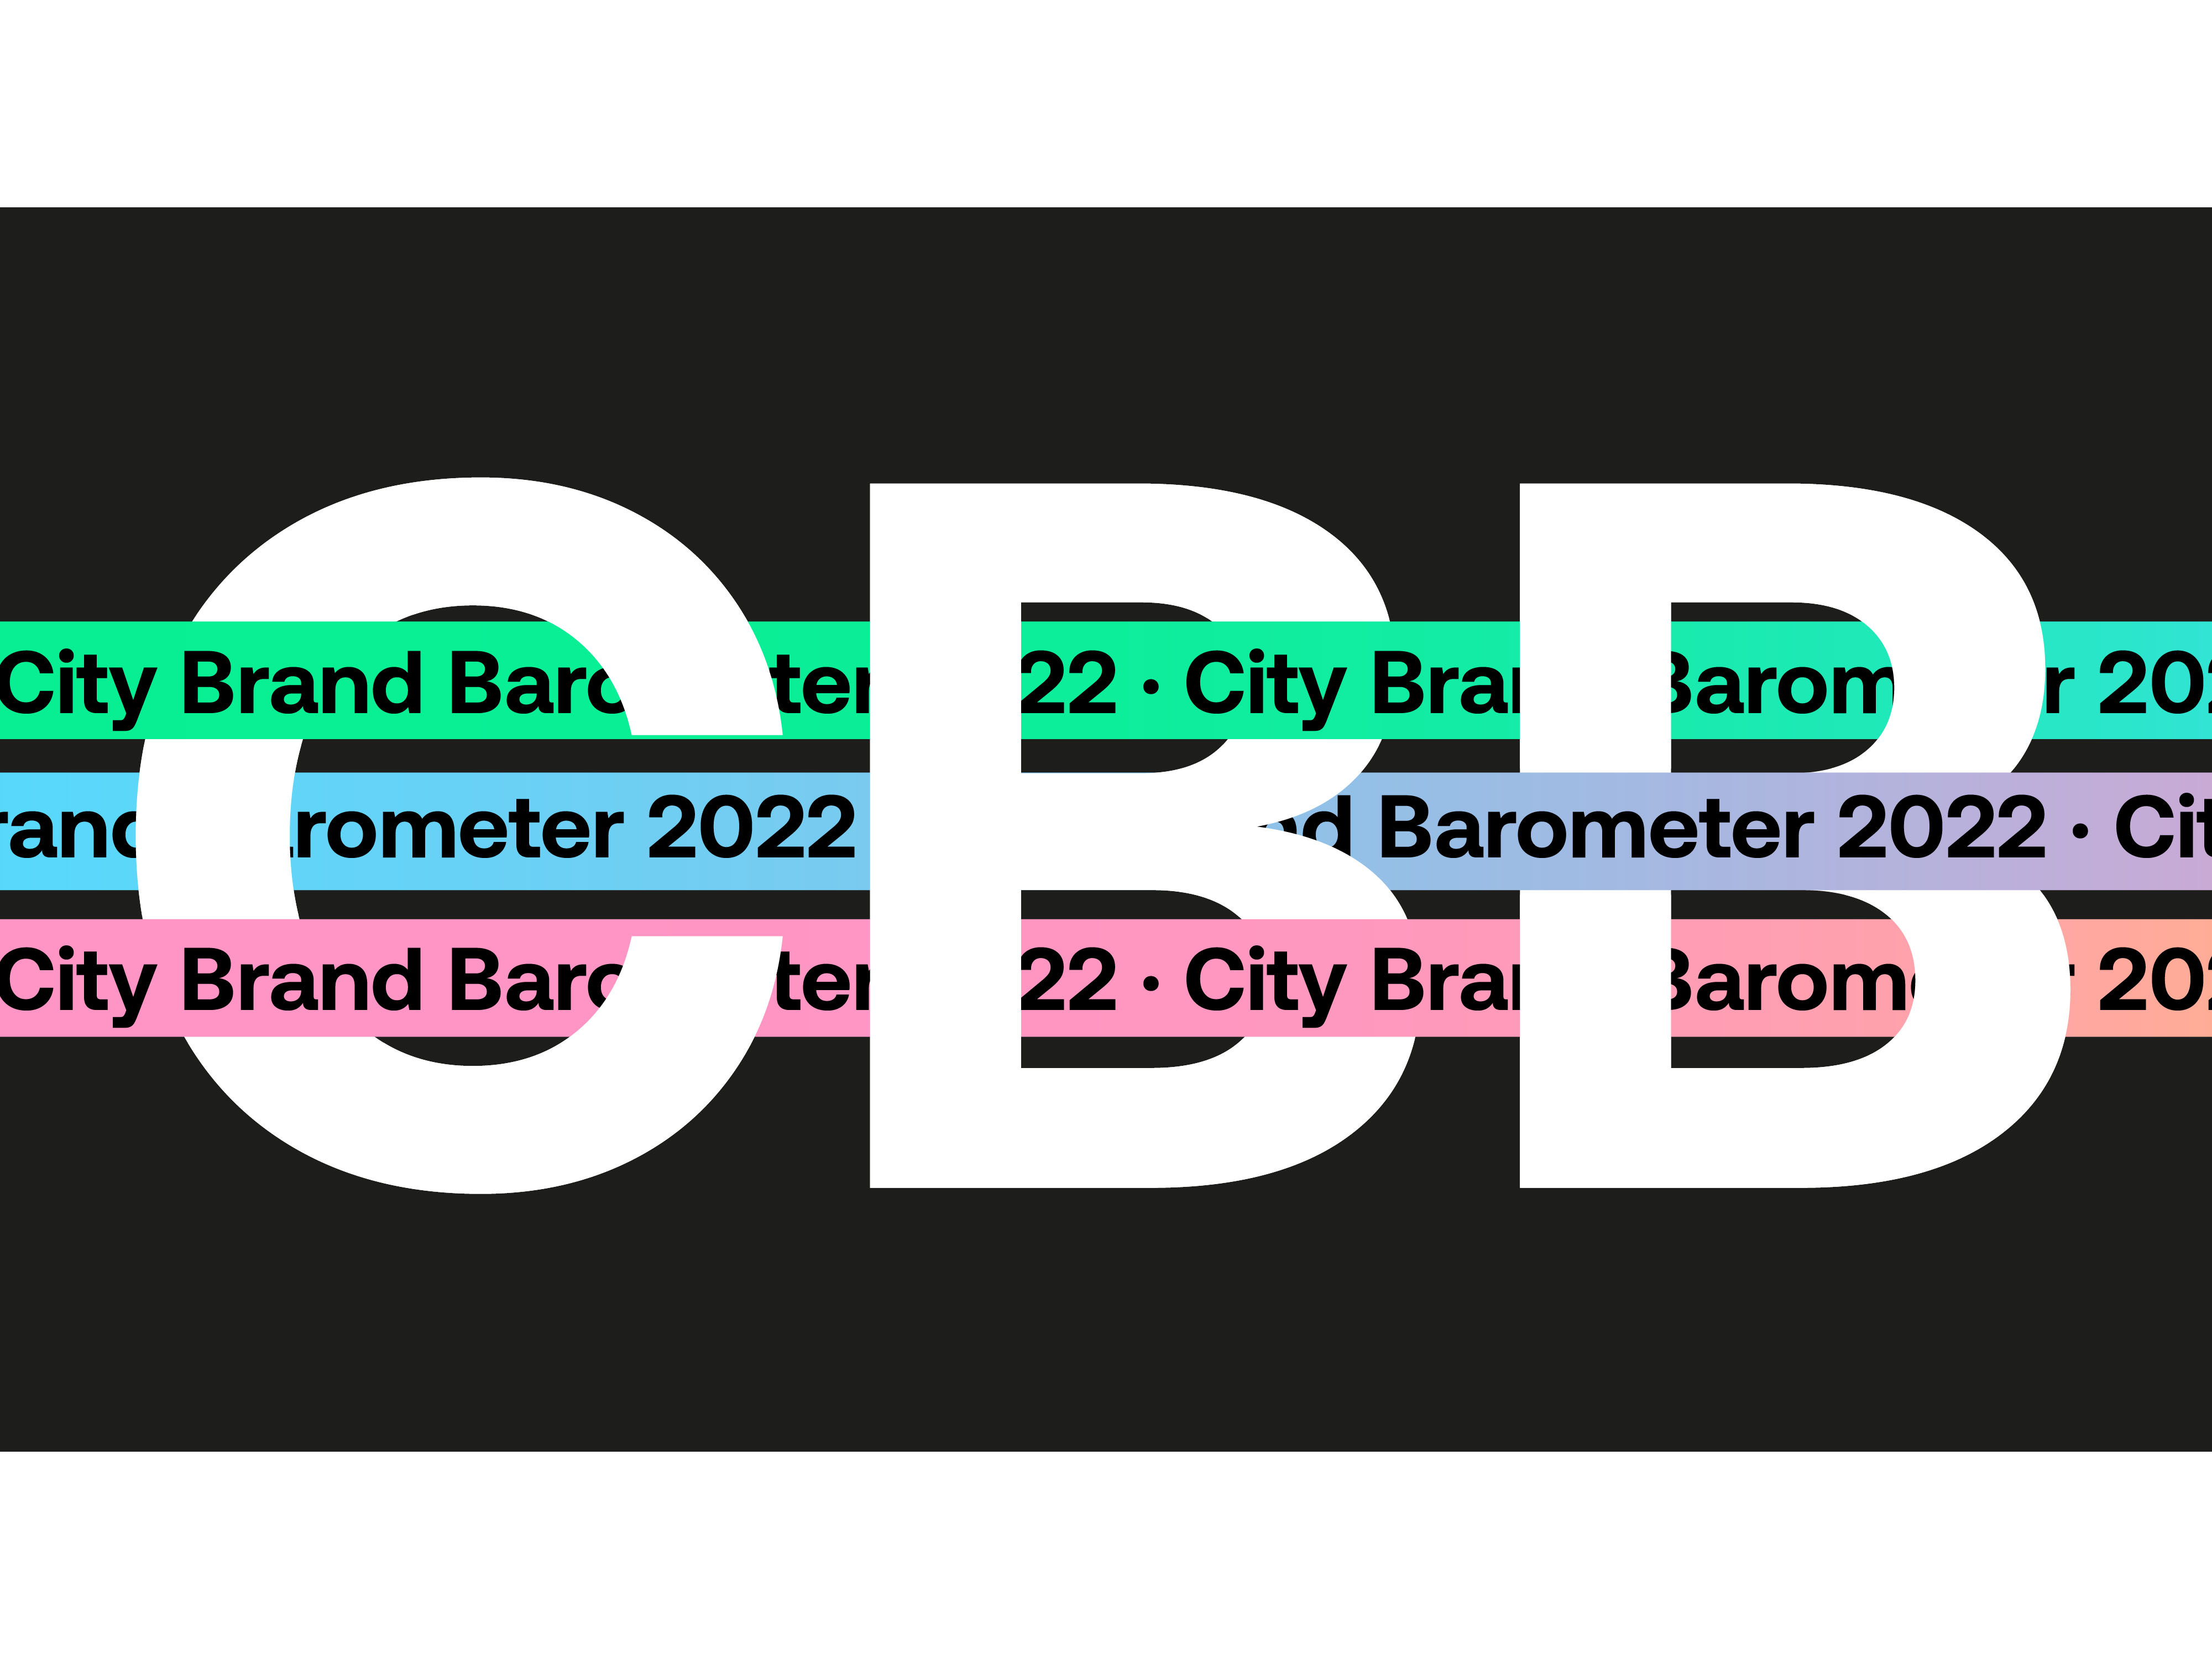 Riyadh and Jeddah debut with promising city brand assets in Saffron's City Brand Barometer 2022